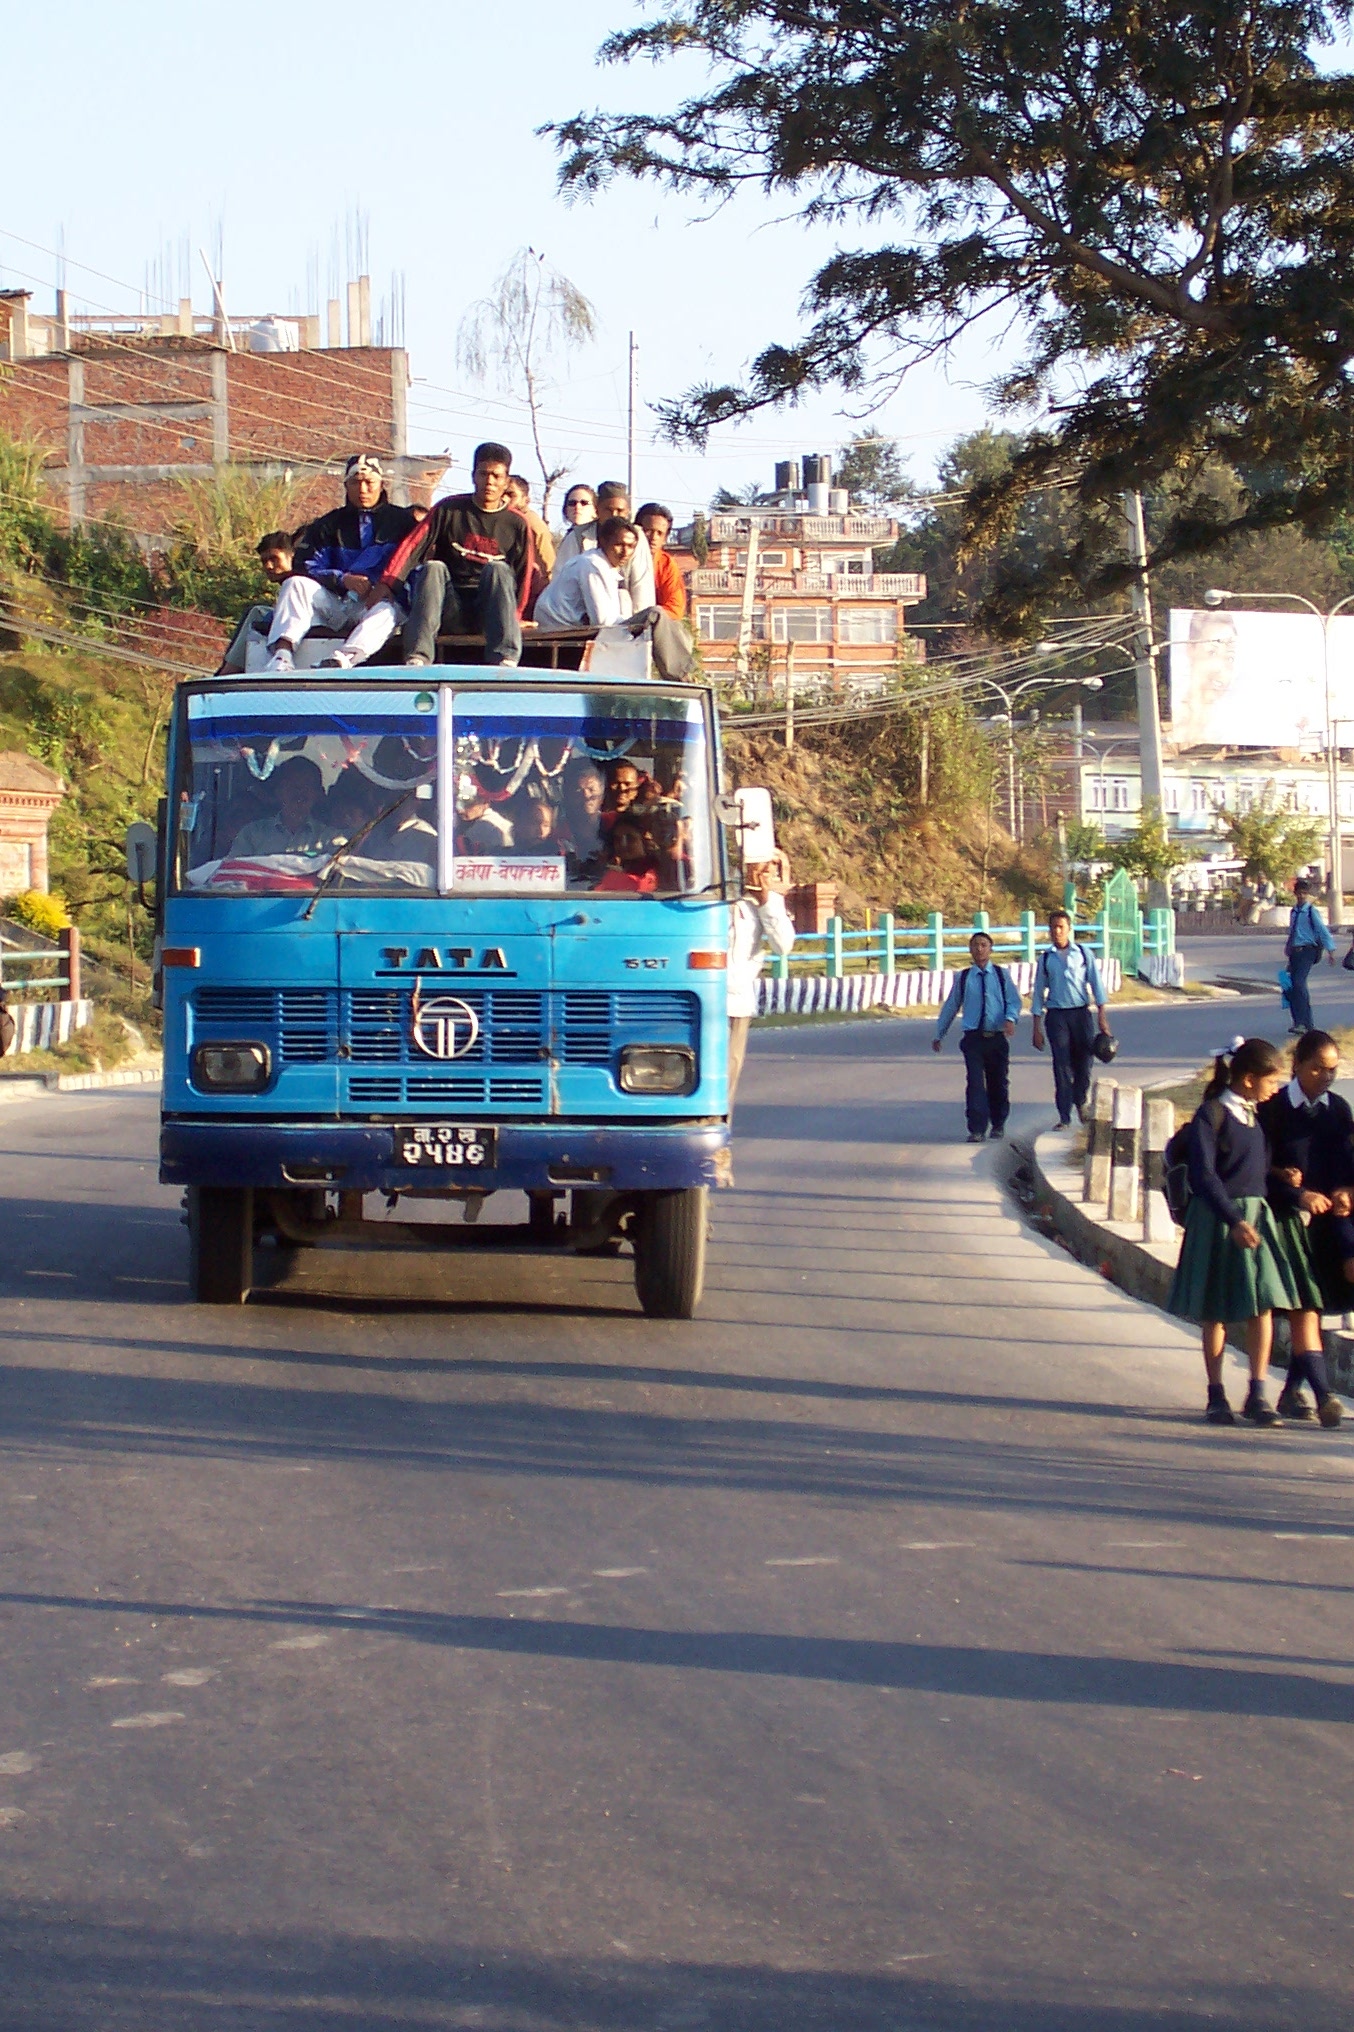 annet bus tata with people on top india